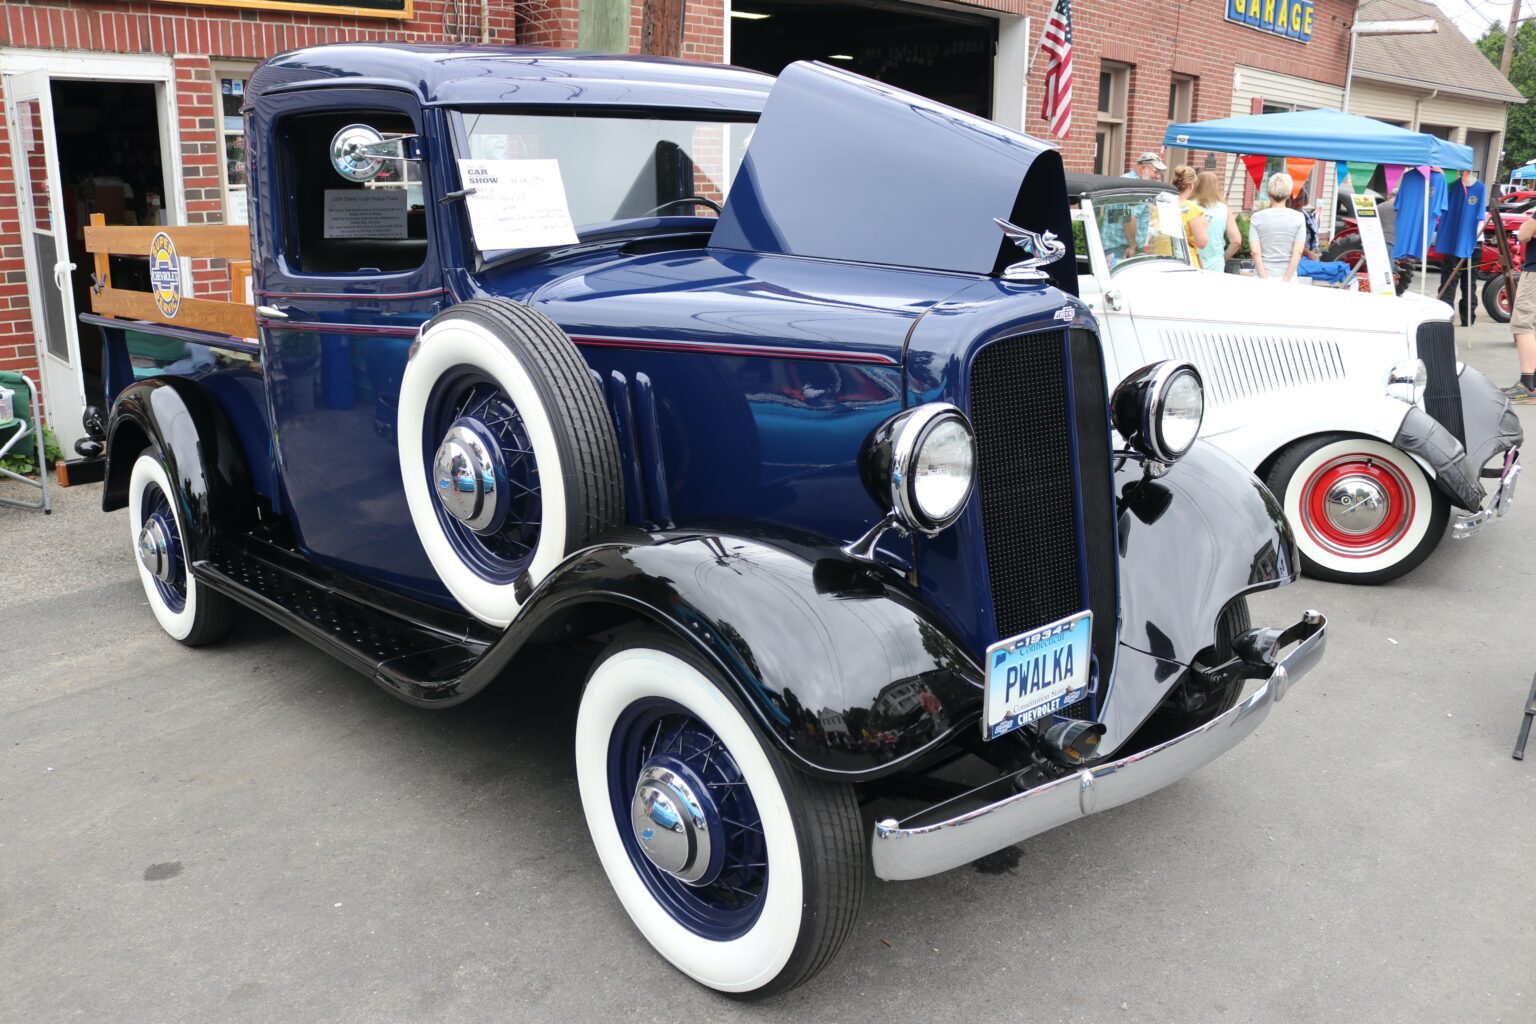 Date Set For 2024 Falls Village Car Show, Any More Dates Claimed?